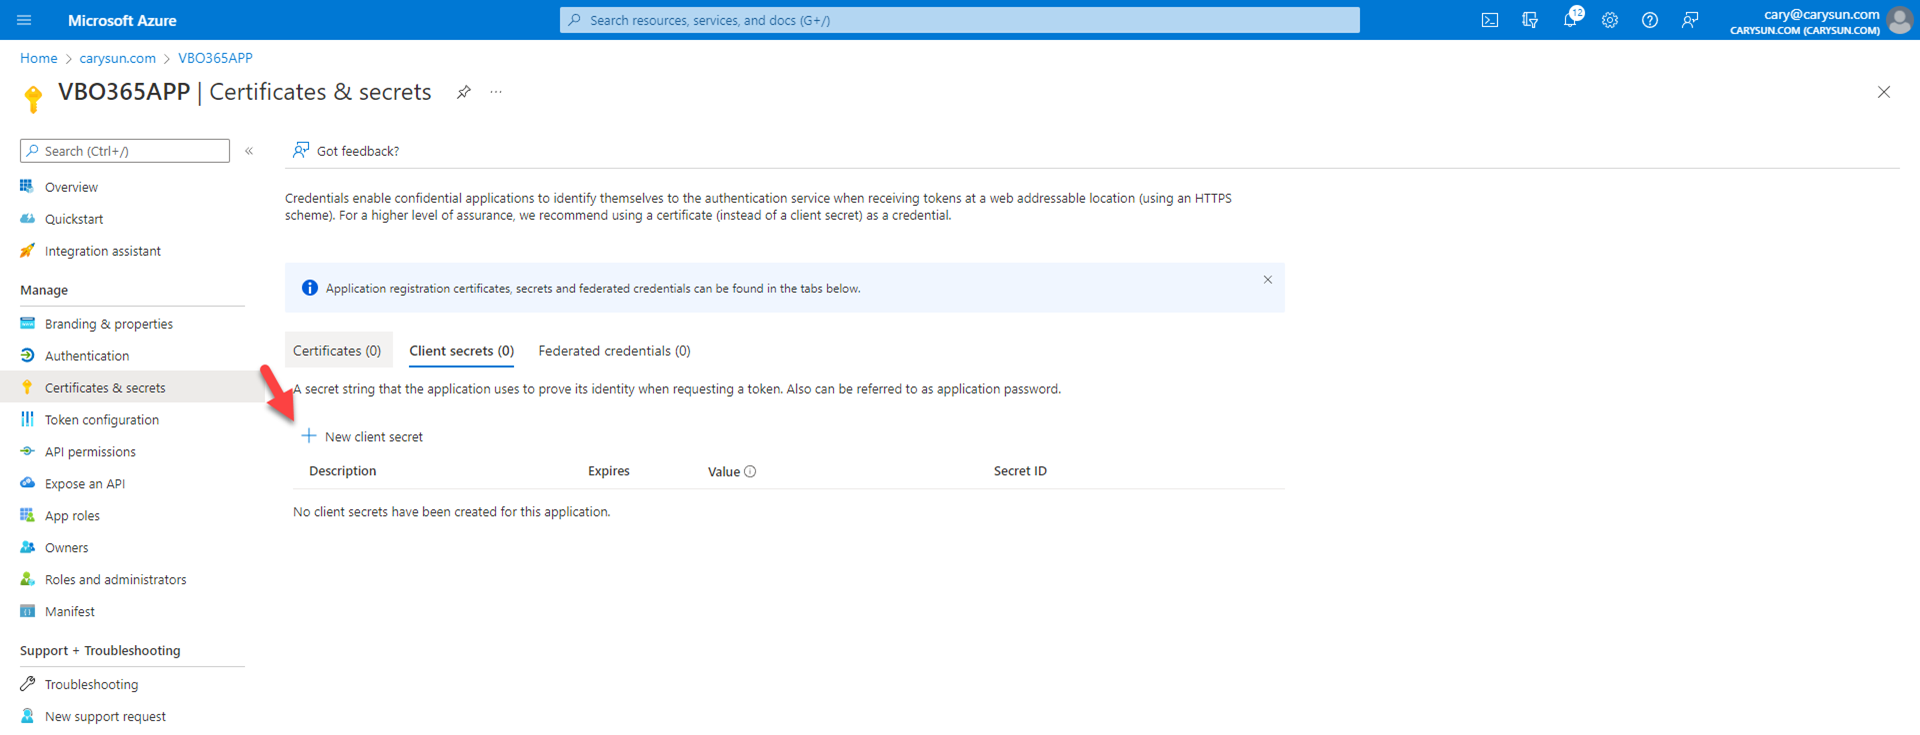 042022 1642 Howtoconfig52 - How to configure Azure AD Application Permissions for Modern App-Only Authentication of Veeam Backup for Microsoft 365